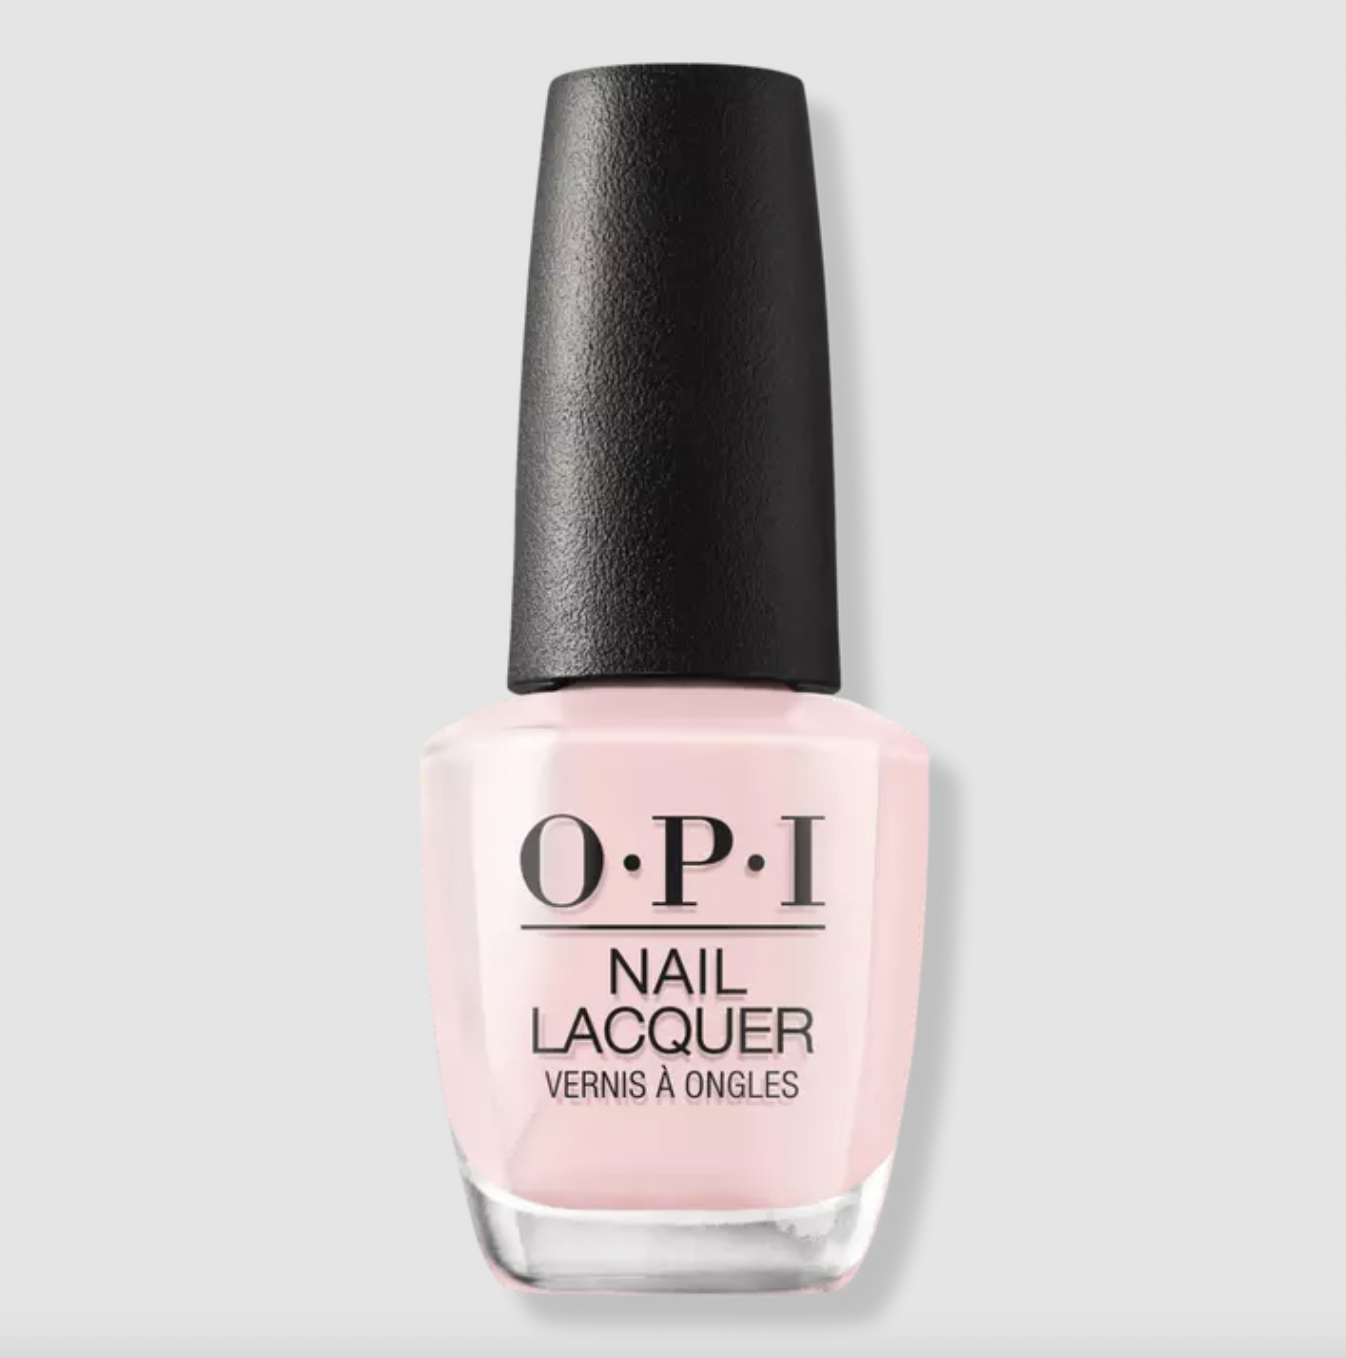 The Best Nail Polish Colours For Spring 2020 - Chatelaine